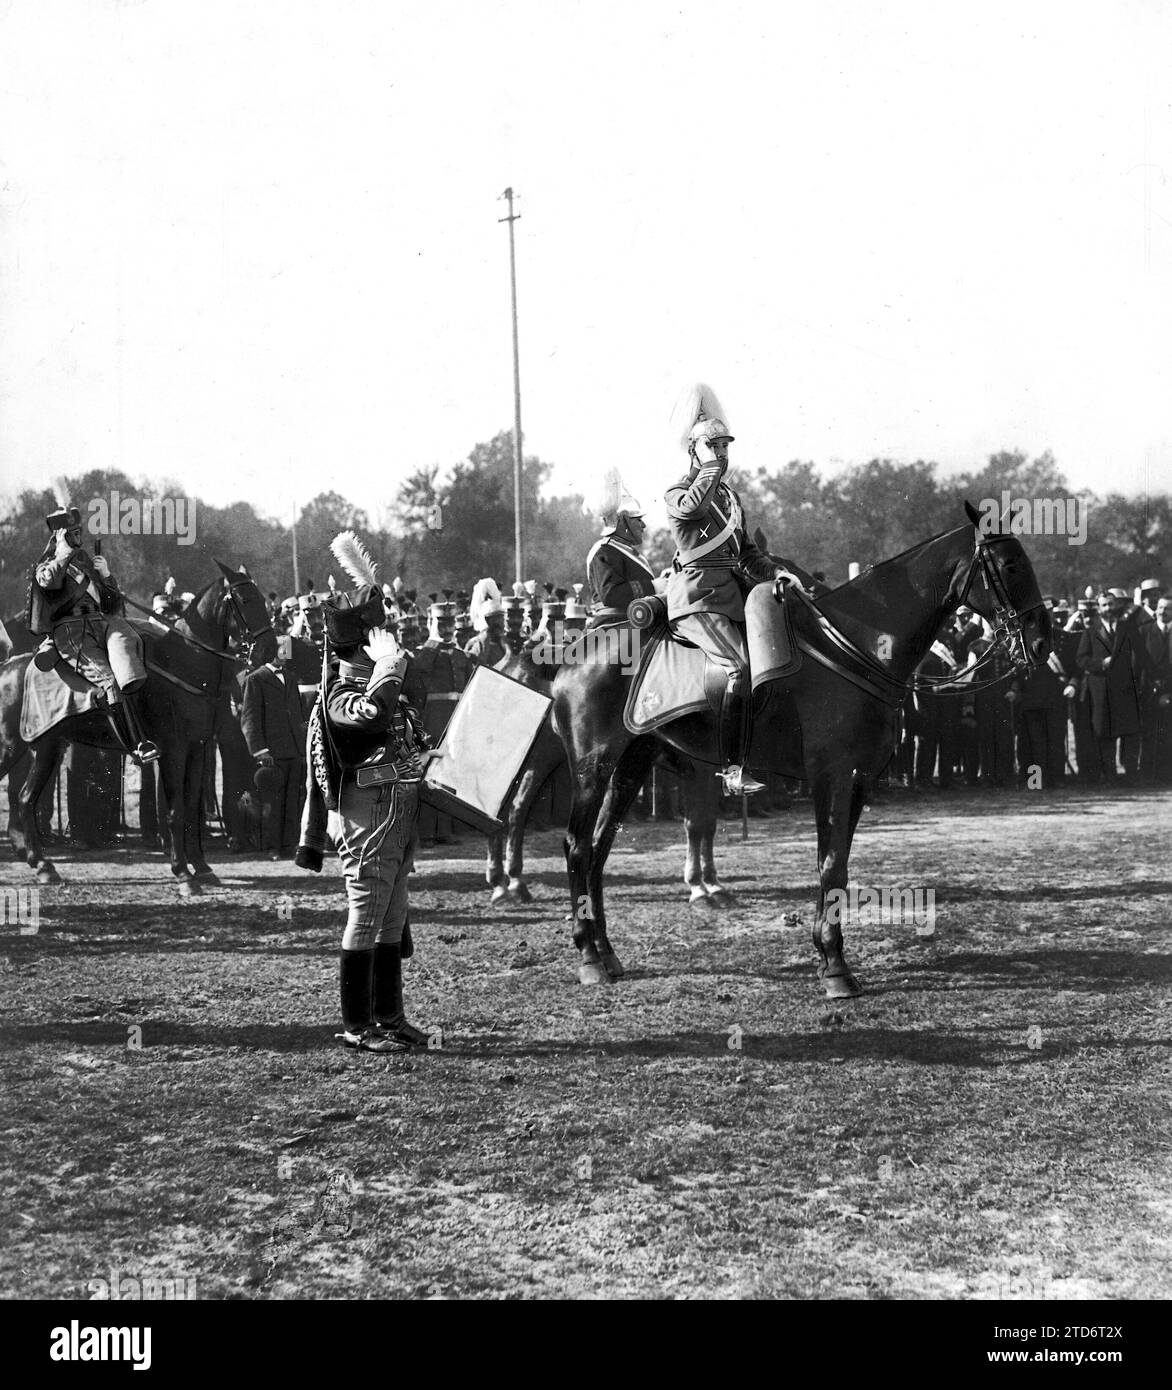 11/23/1910. Solemn military ceremony in Seville. HM the King, on Horseback, Saluting the standard of Alfonso Xii's regiment Moments before Imposing on him the tie of Saint Ferdinand, next to the Monarch, on Foot, with the case of the decoration in His Hand, Colonel Cavalcanti, who Commanded the memorable Taxdirt load. Credit: Album / Archivo ABC / Francisco Goñi Stock Photo